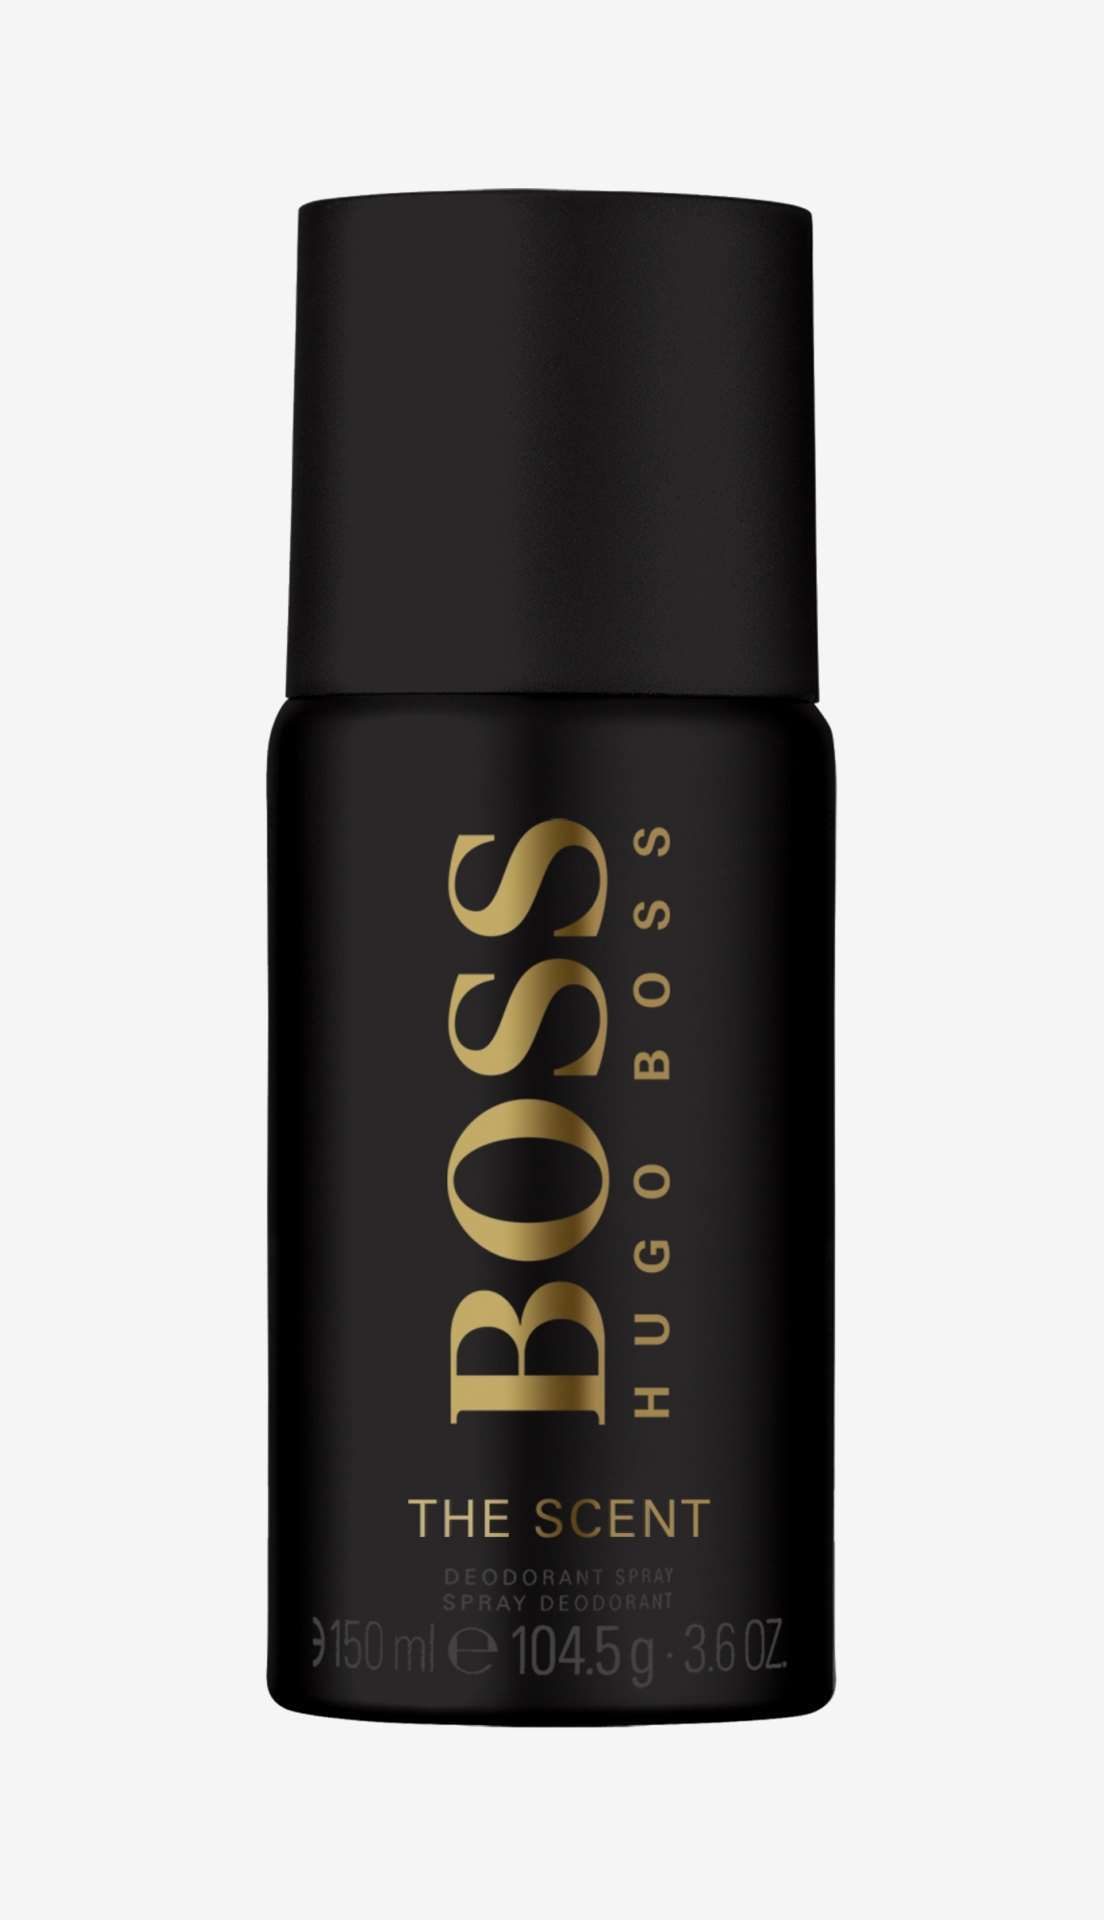 hugo boss the scent deo